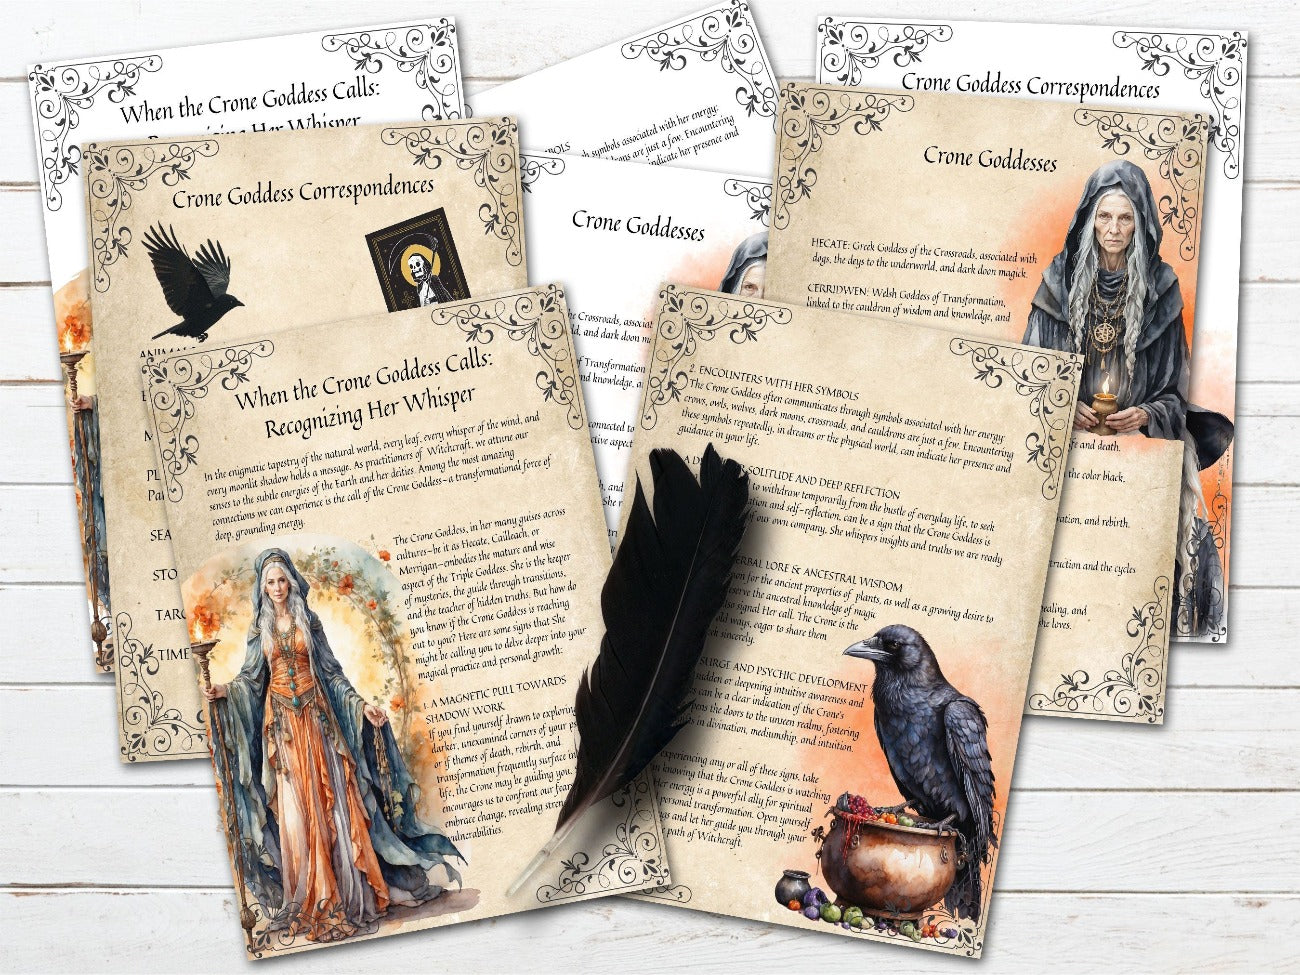 THE CRONE GODDESS, When the Goddess Calls 2 pages, Crone Correspondences, and List of Crone Goddesses, shown with the optional parchment and white backgrounds - Morgana Magick Spell